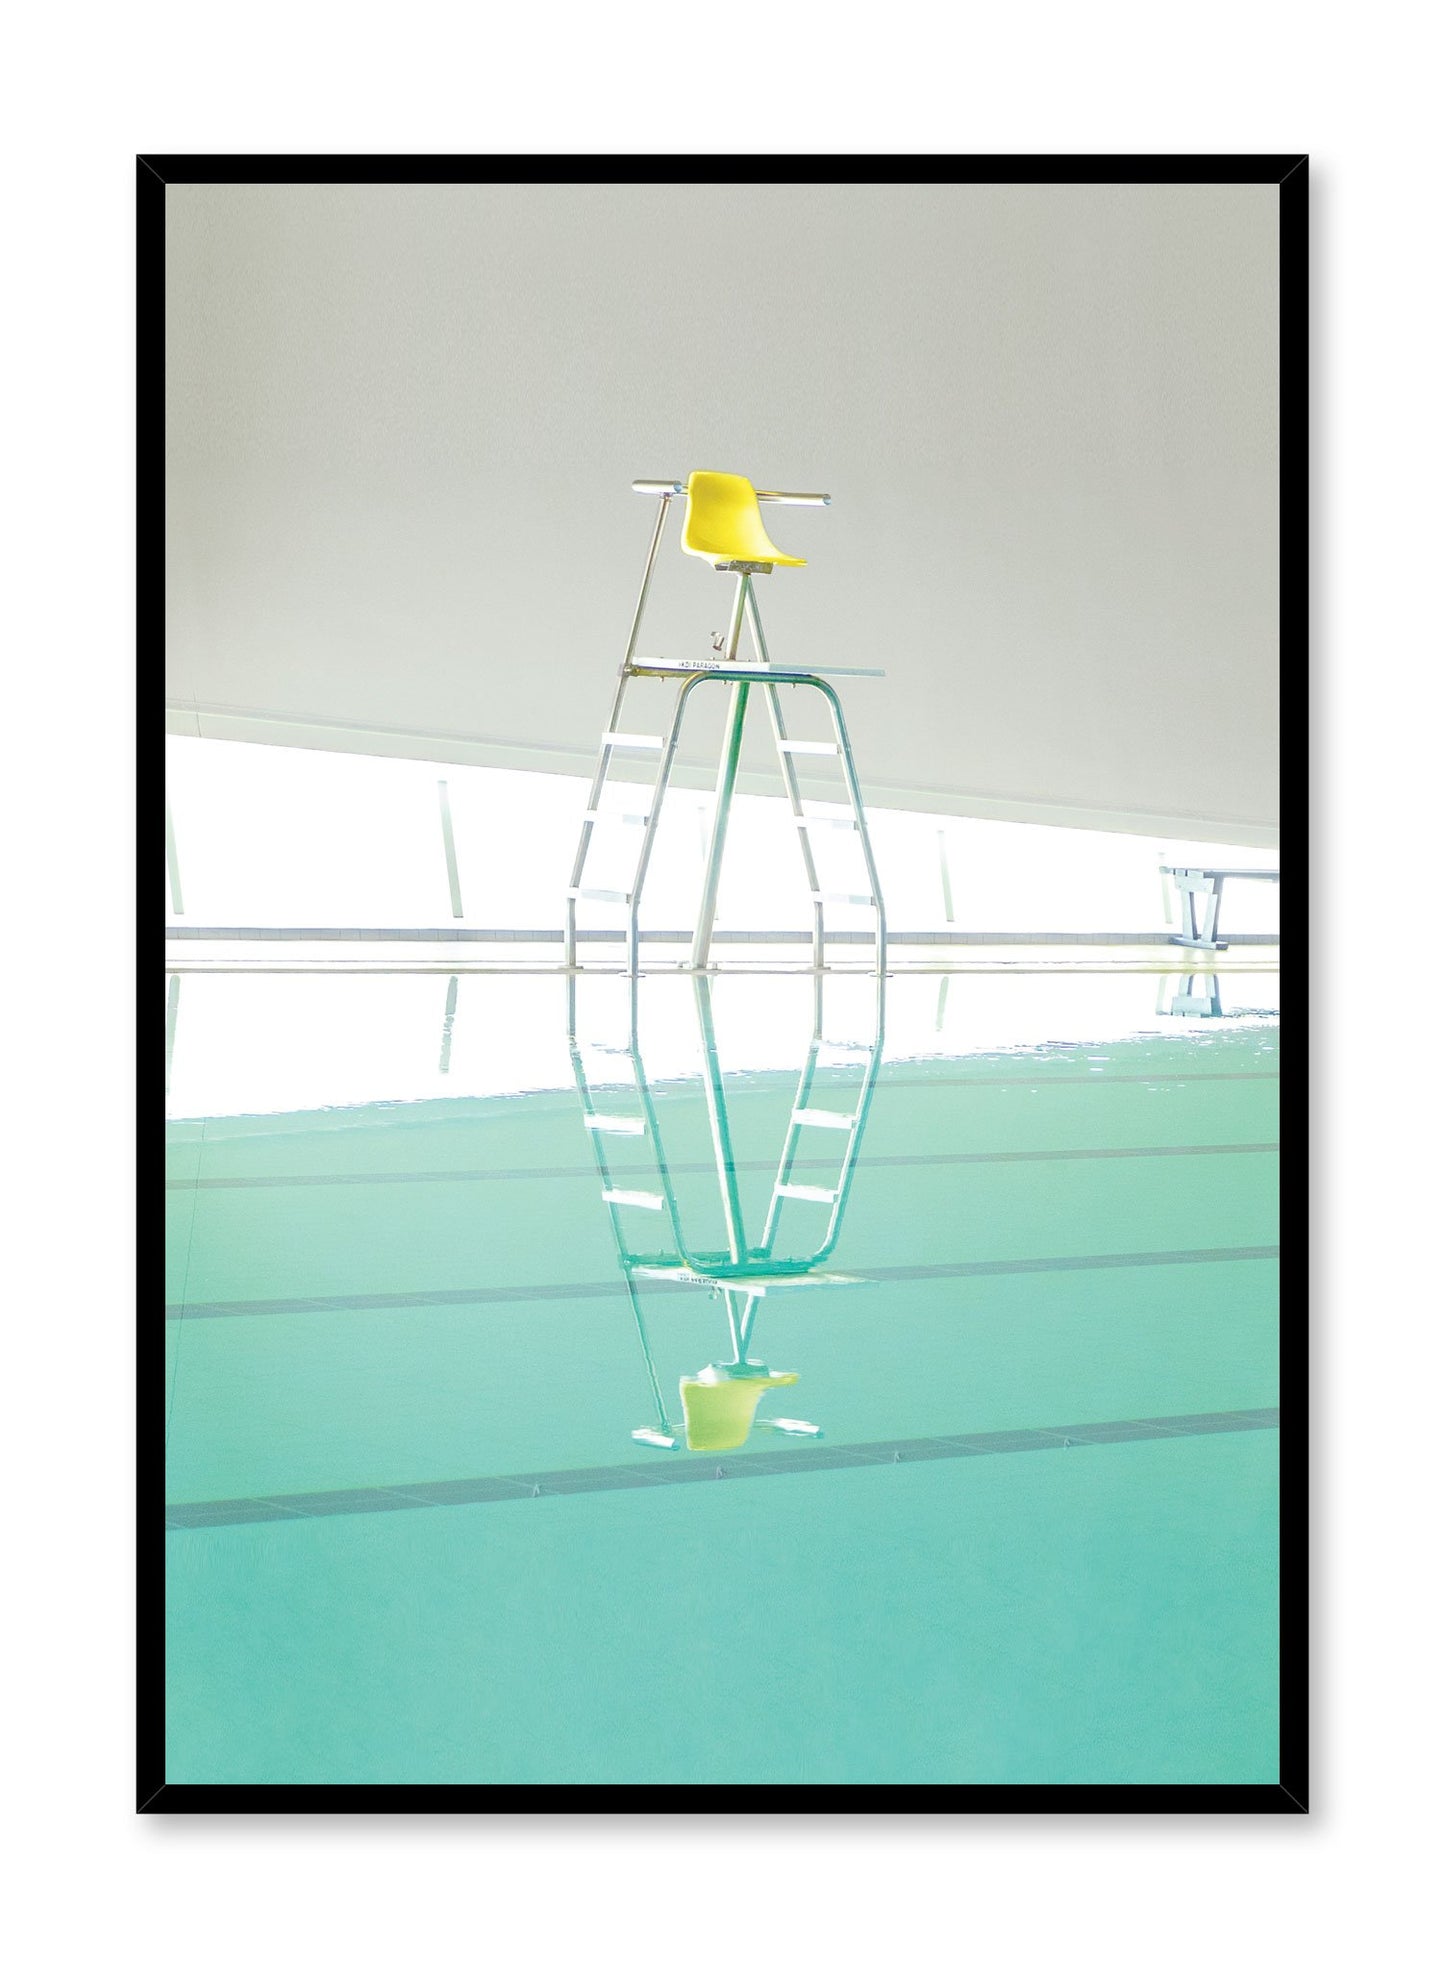 Minimalist design poster by Opposite Wall with photography of lifeguard chair by pool